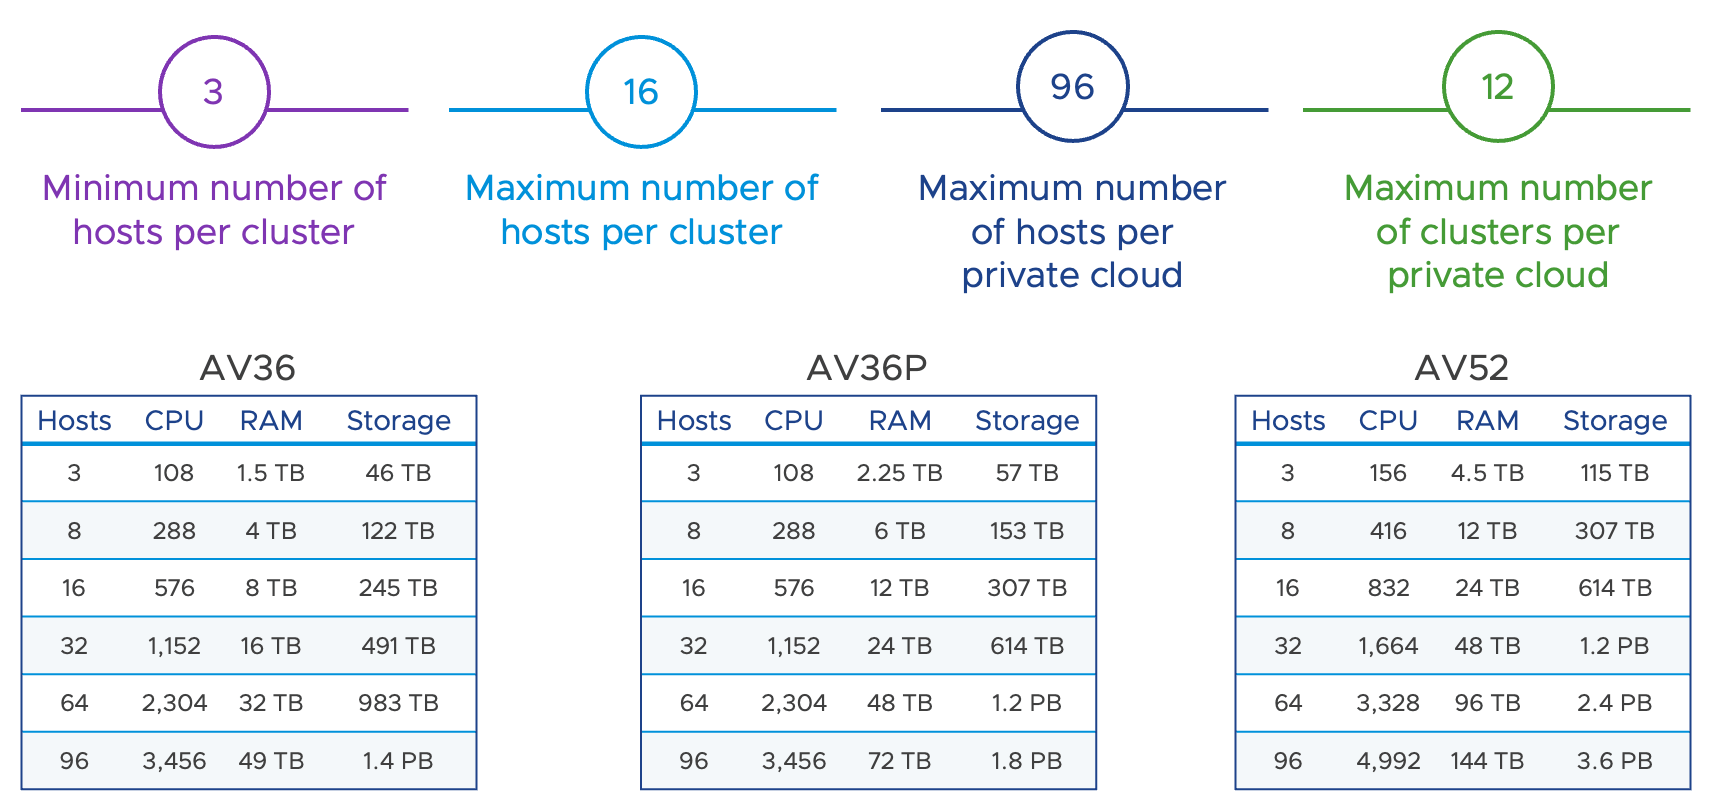 Azure VMware Solution vSphere Cluster Scaling and Maximums